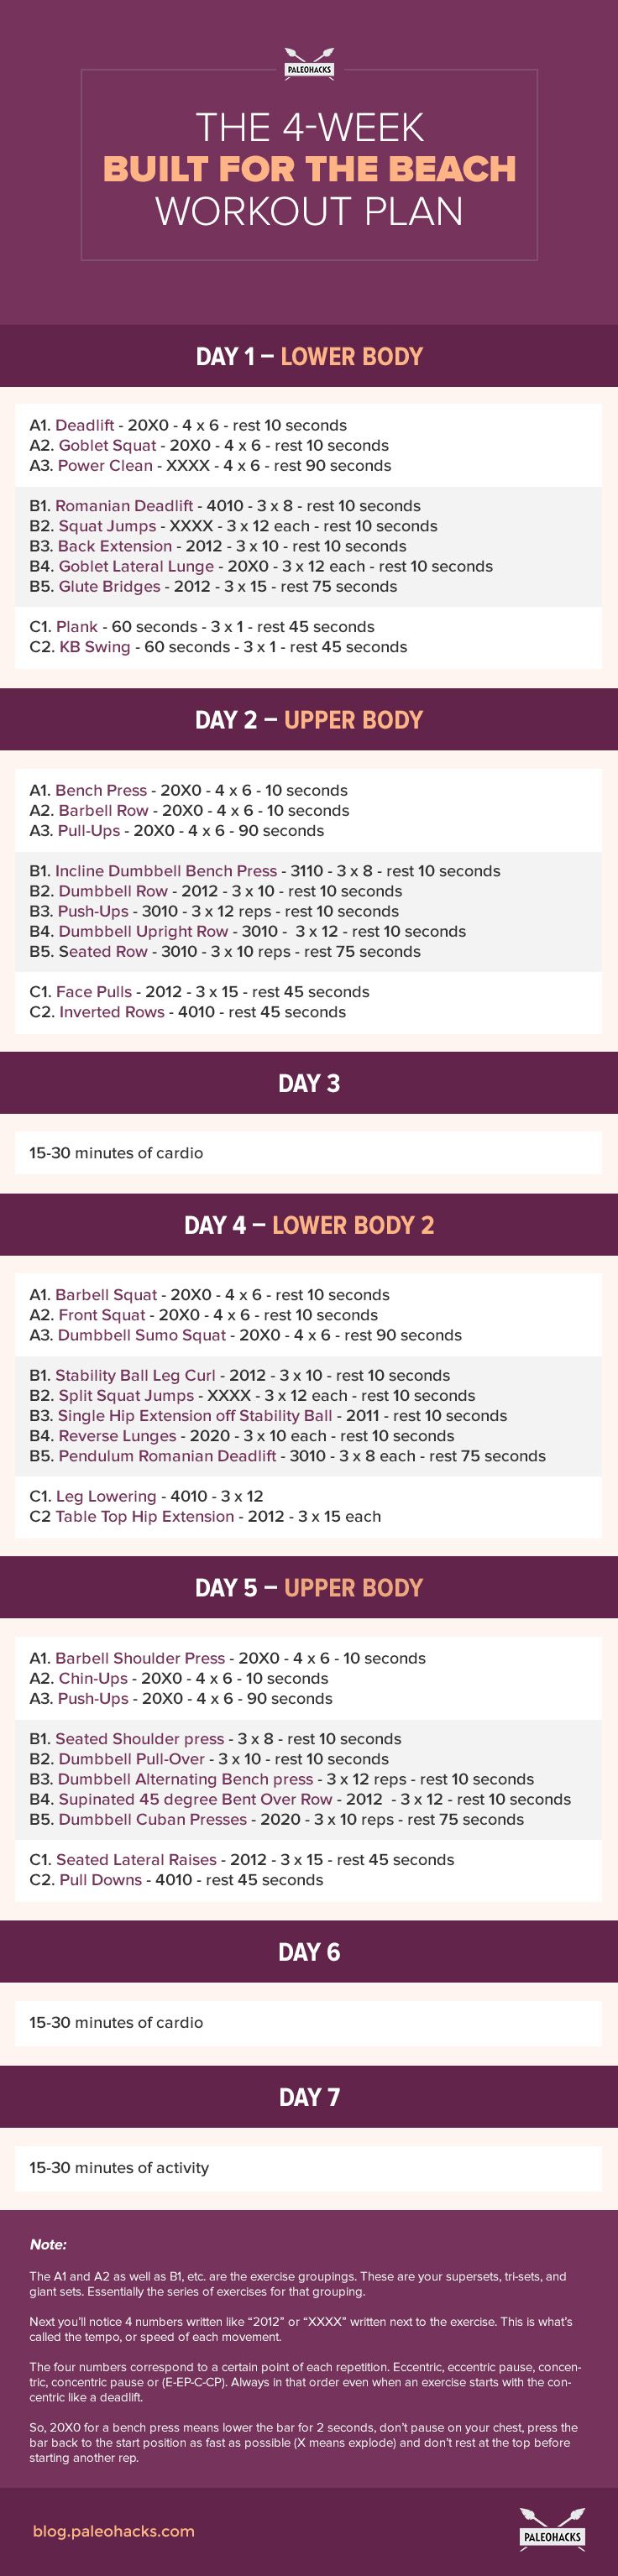 The_4-Week_Built_For_the_Beach_Workout_Plan_infographic